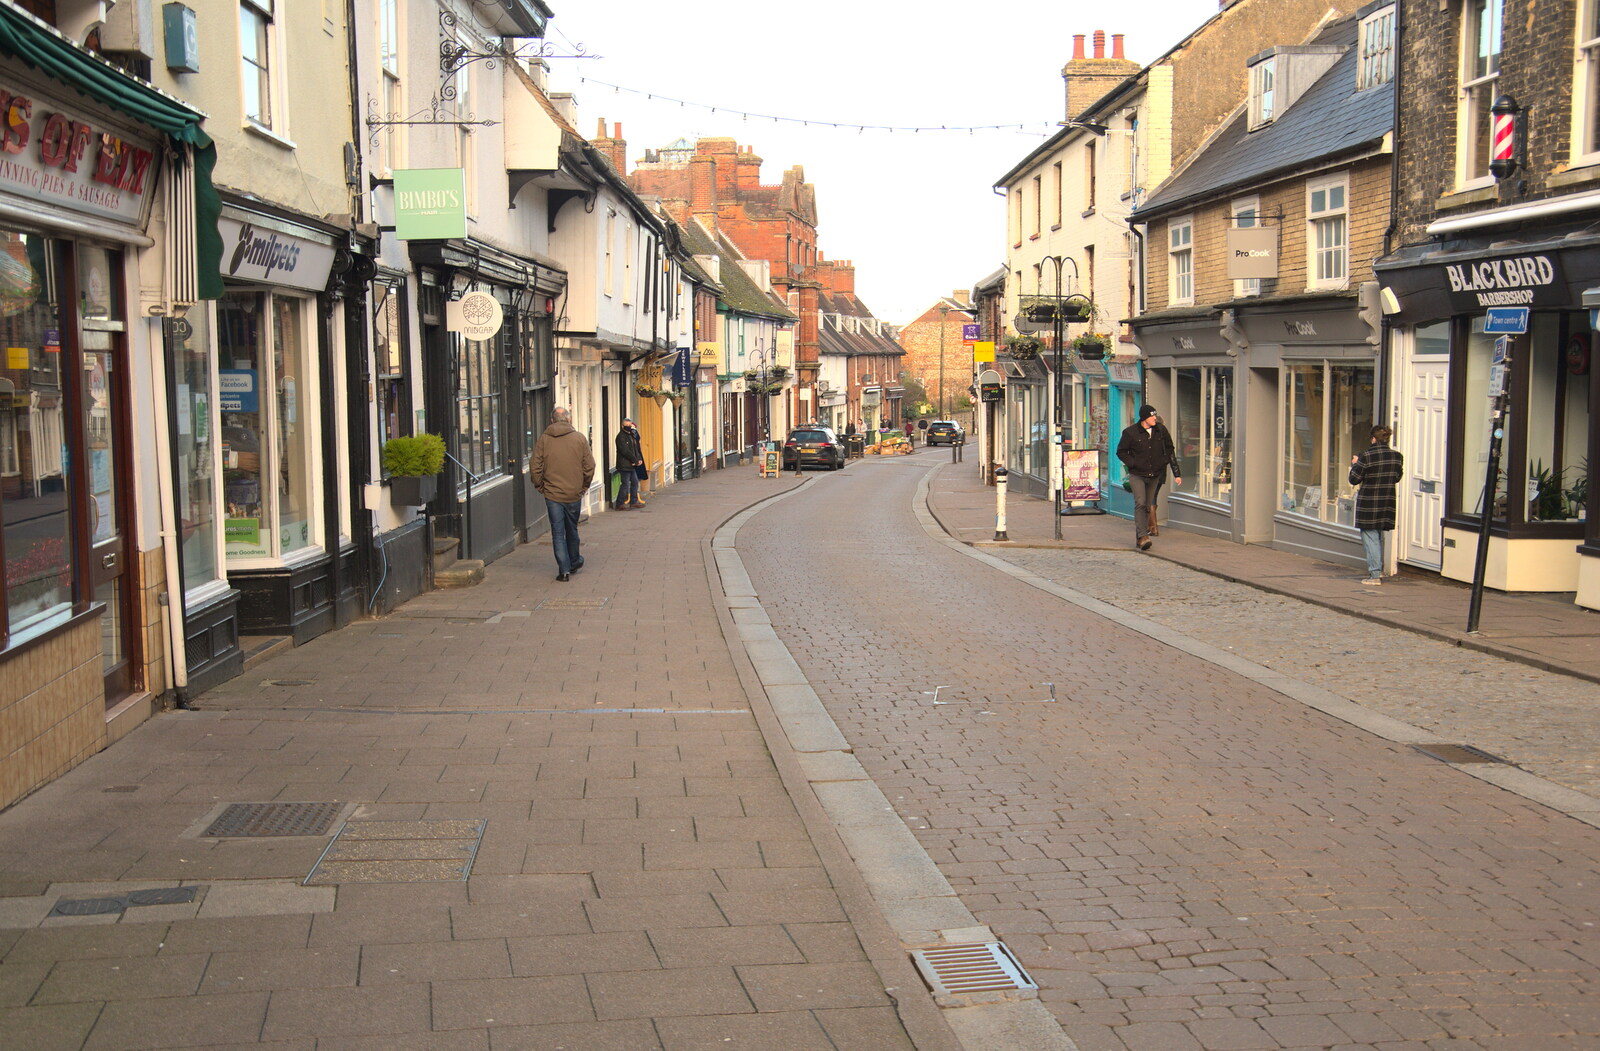 Further along St. John's Street from A Few Hours in Bury St. Edmunds, Suffolk - 3rd January 2022